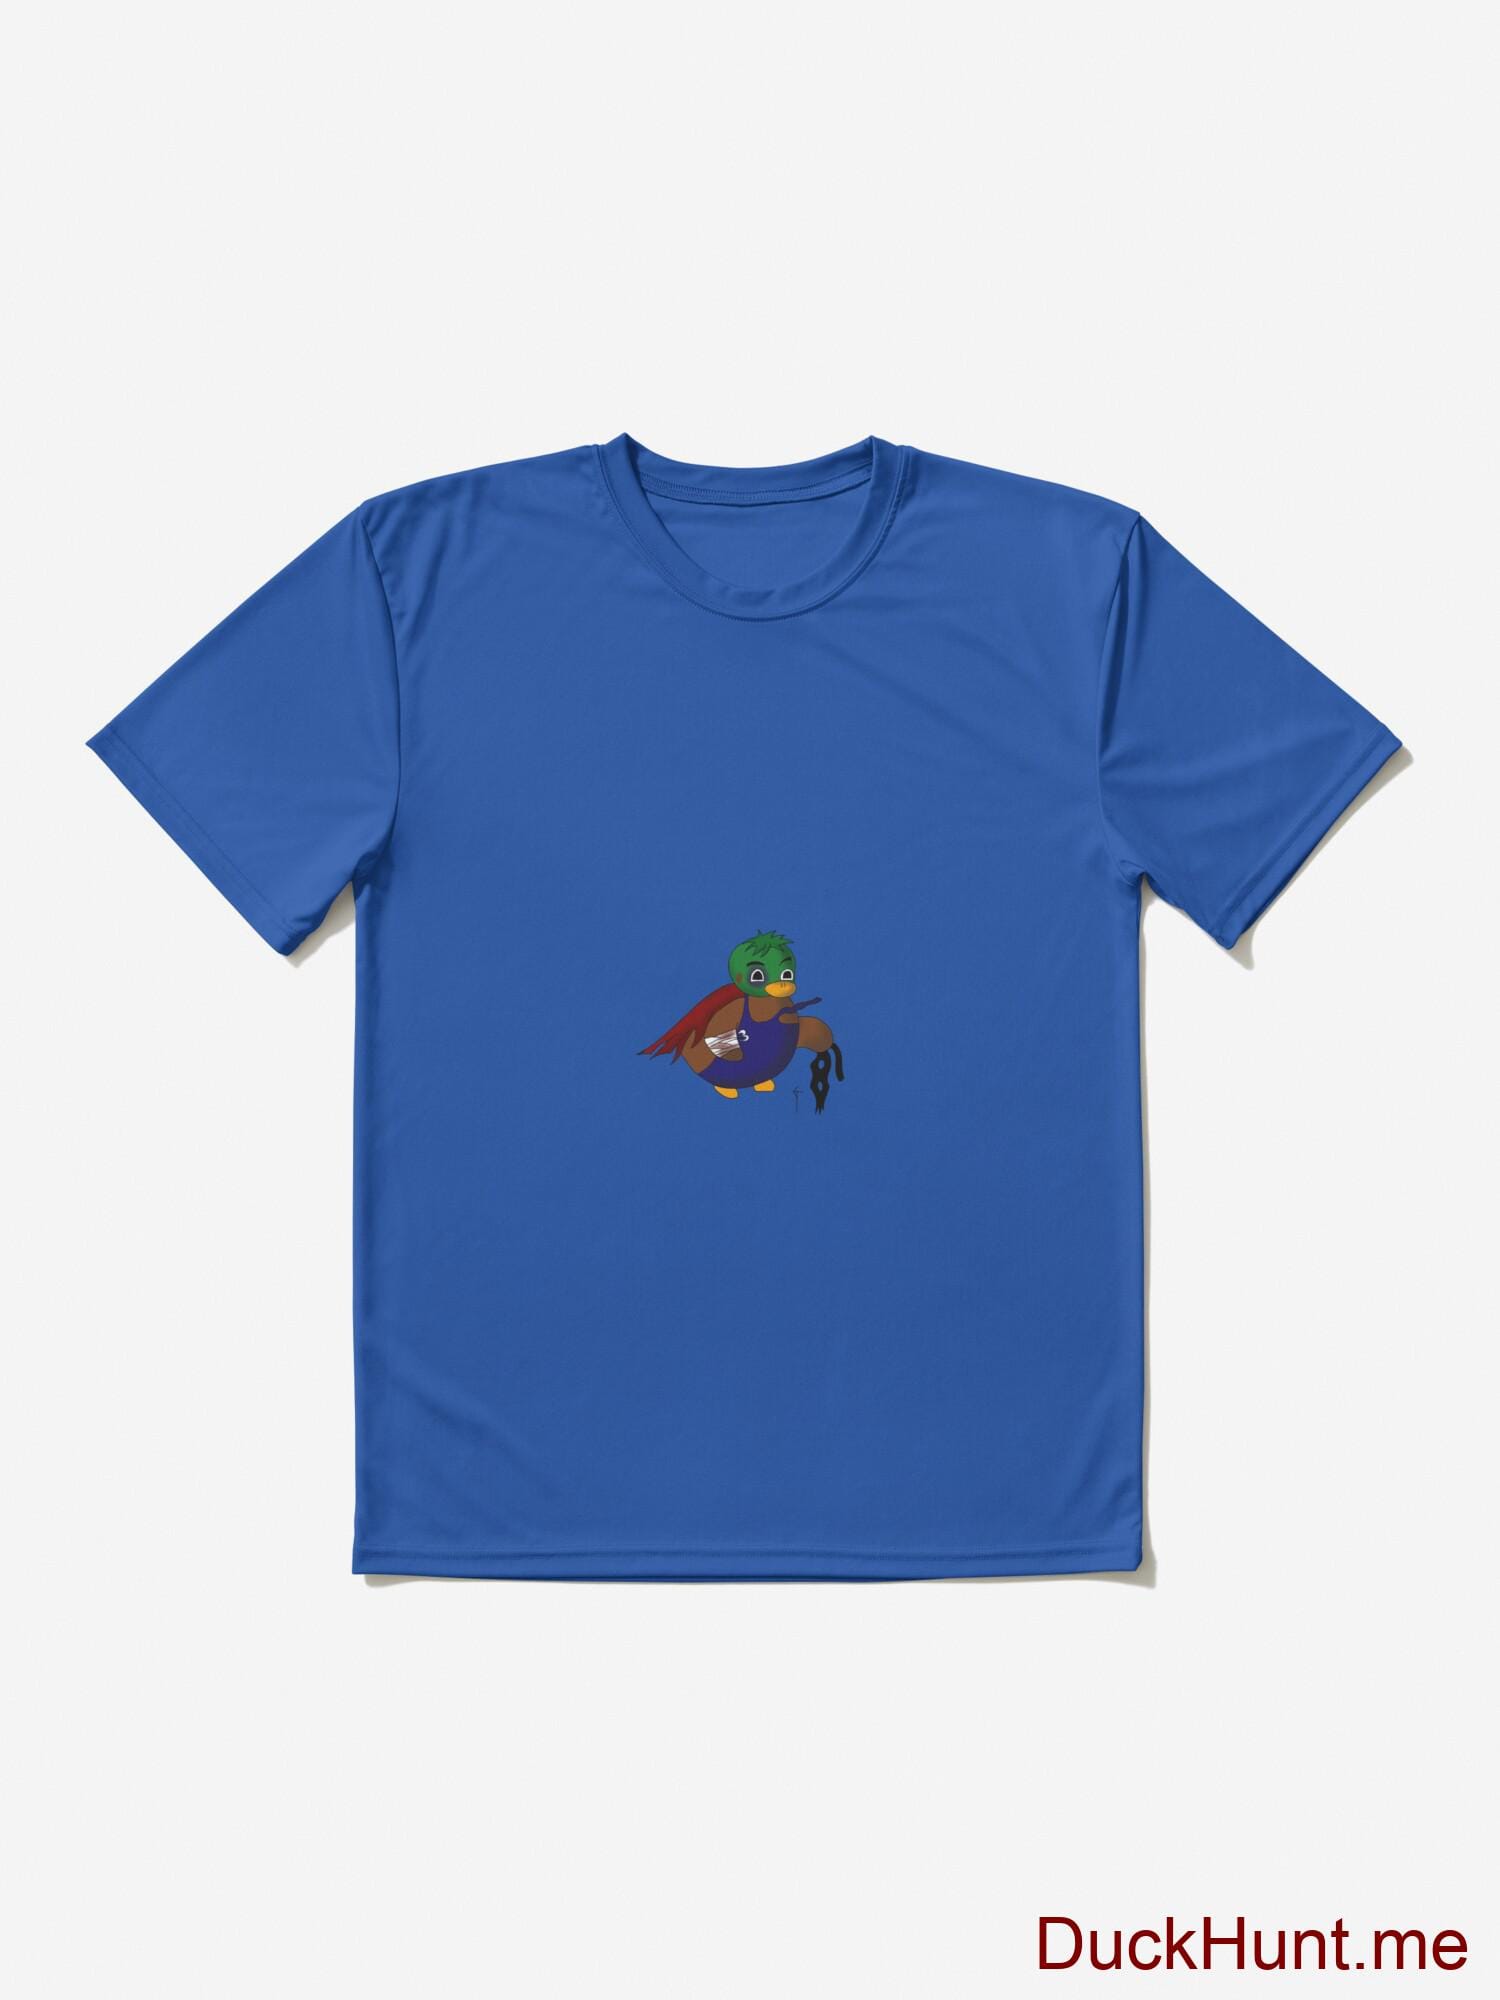 Dead DuckHunt Boss (smokeless) Royal Blue Active T-Shirt (Front printed) alternative image 2